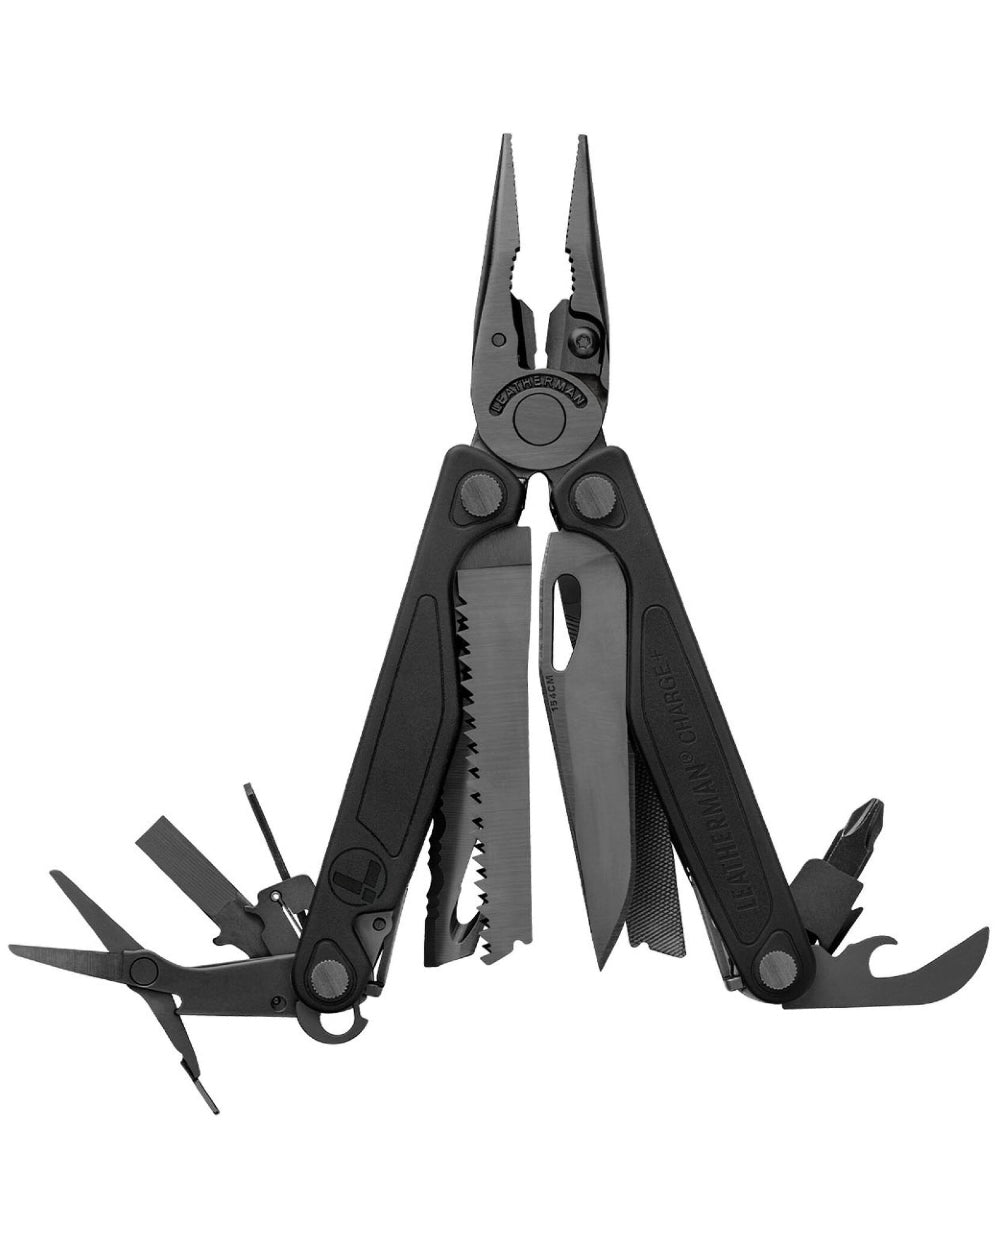 Leatherman Charge+ Multi-Tool in Black Oxide 